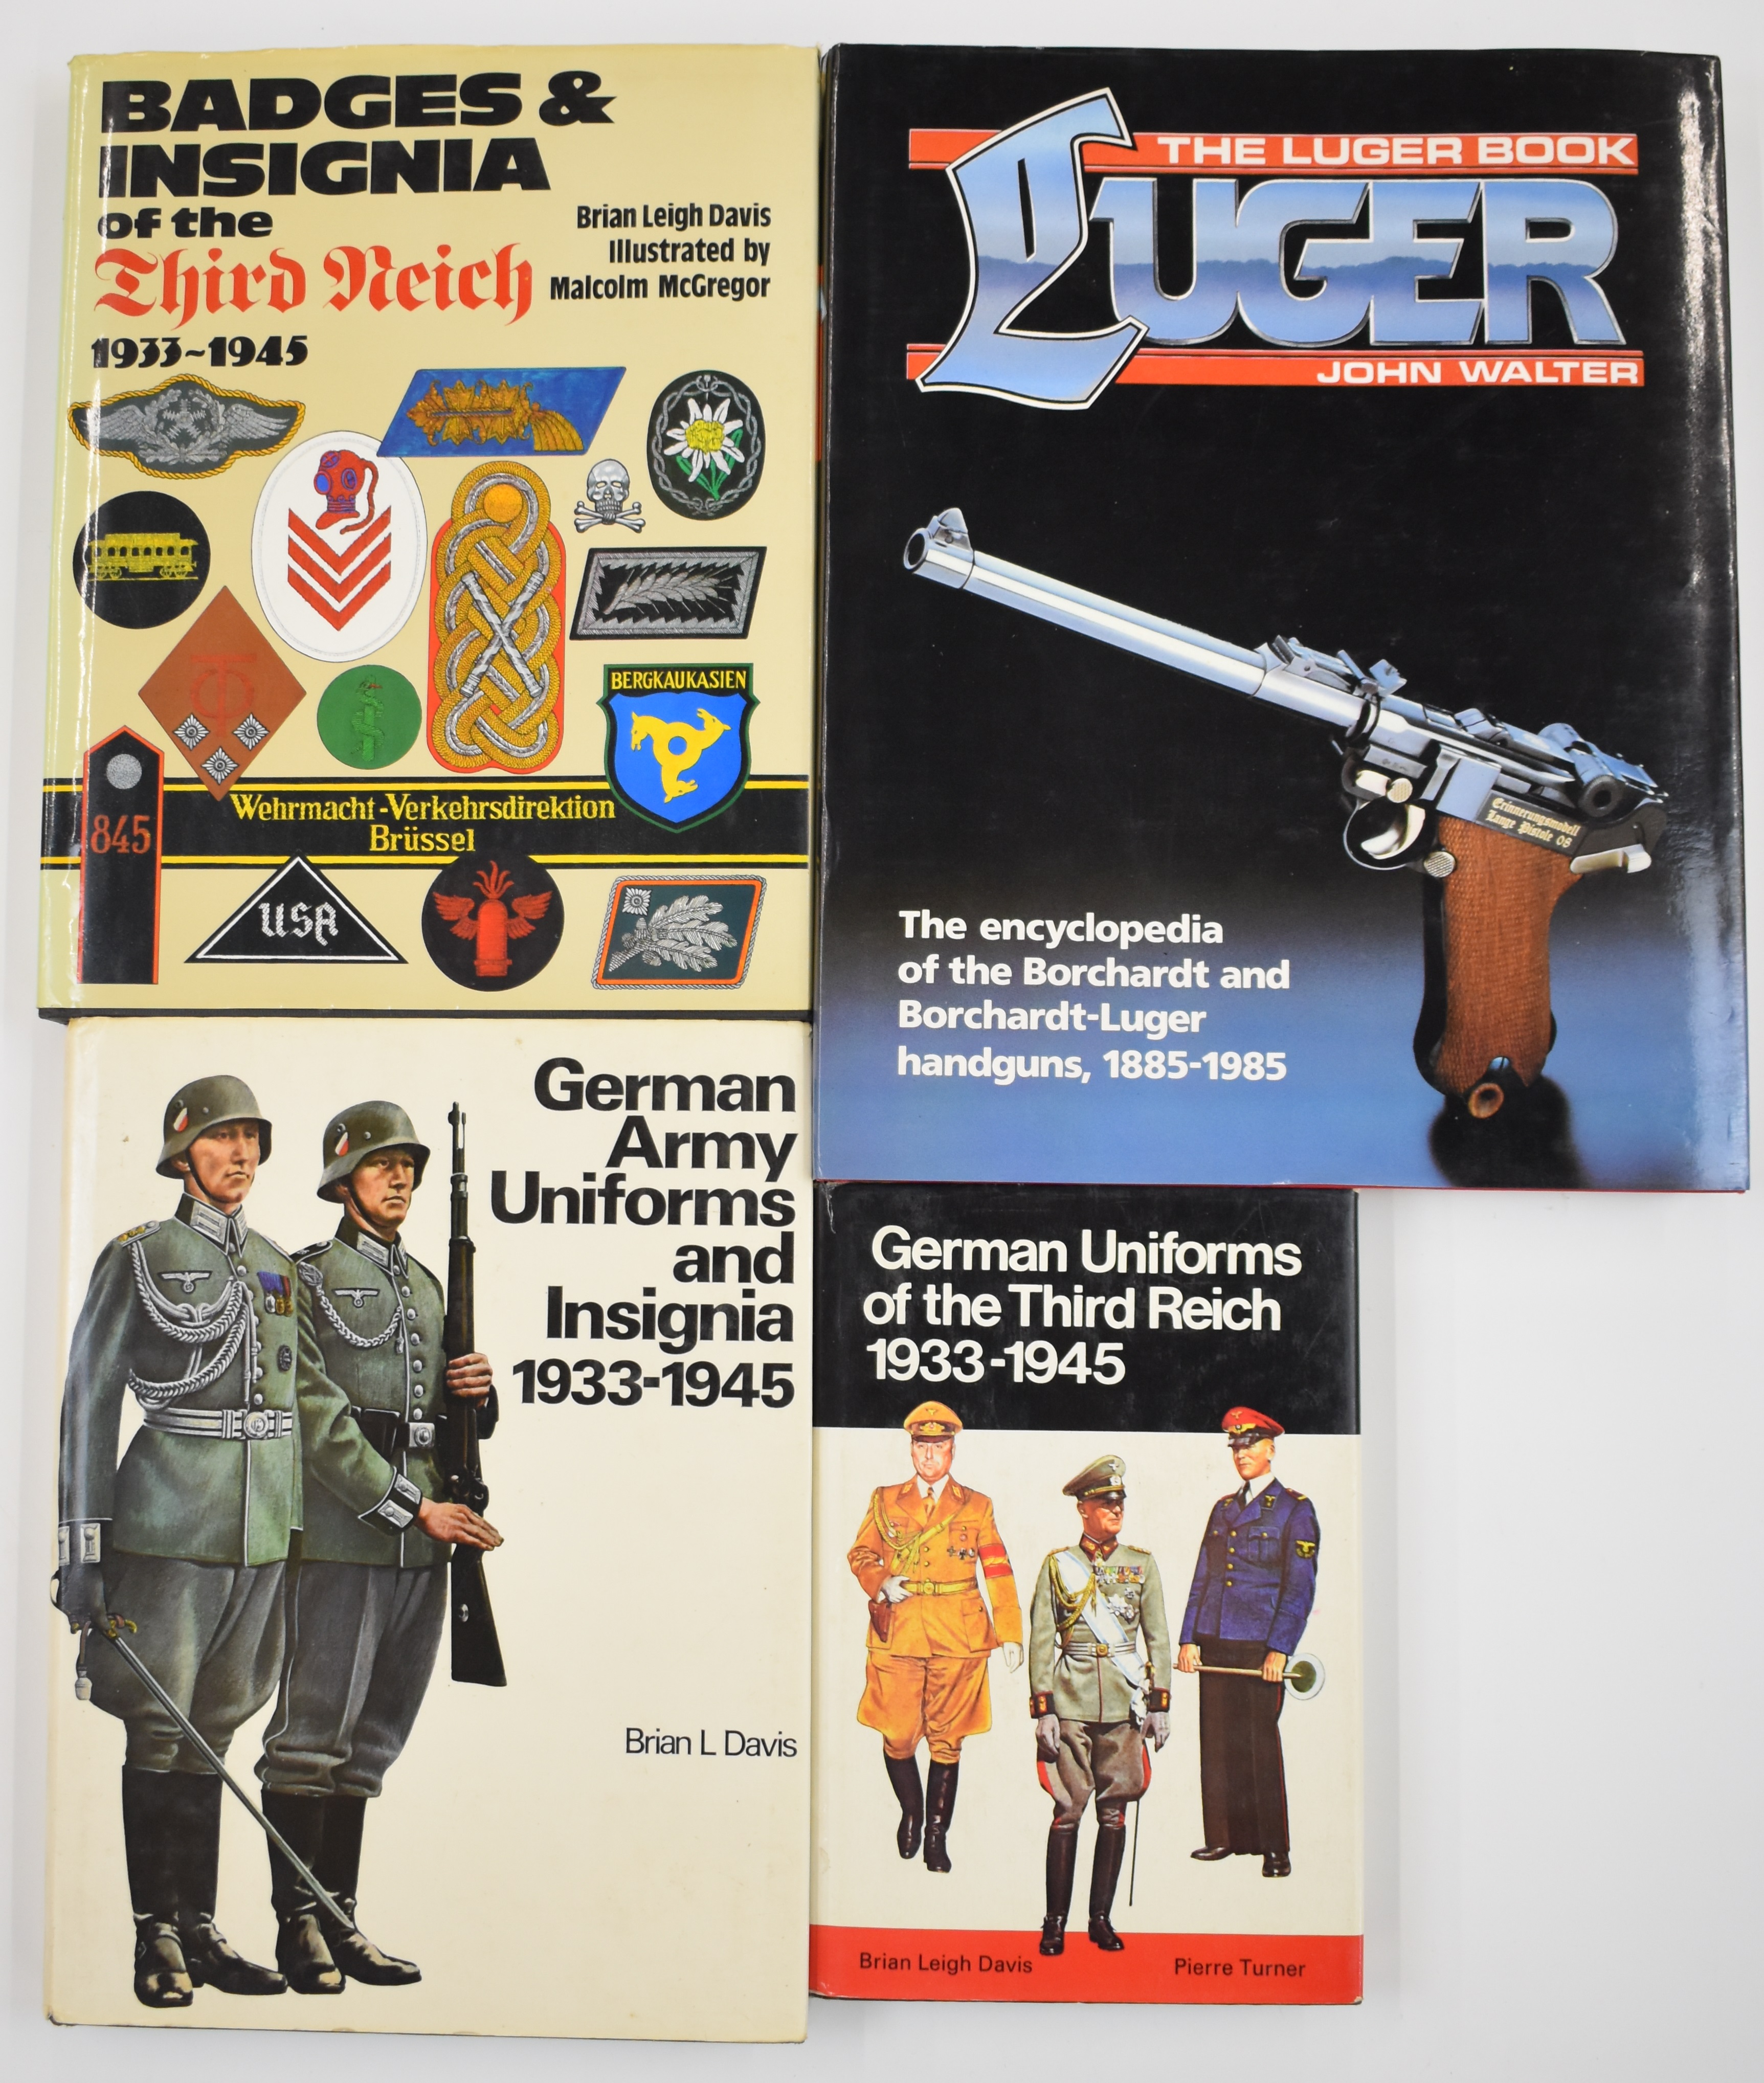 Germany Army Uniforms & Insignia 1933-1945 by Brian Davis 1977. Badges & Insignia of the Third Reich